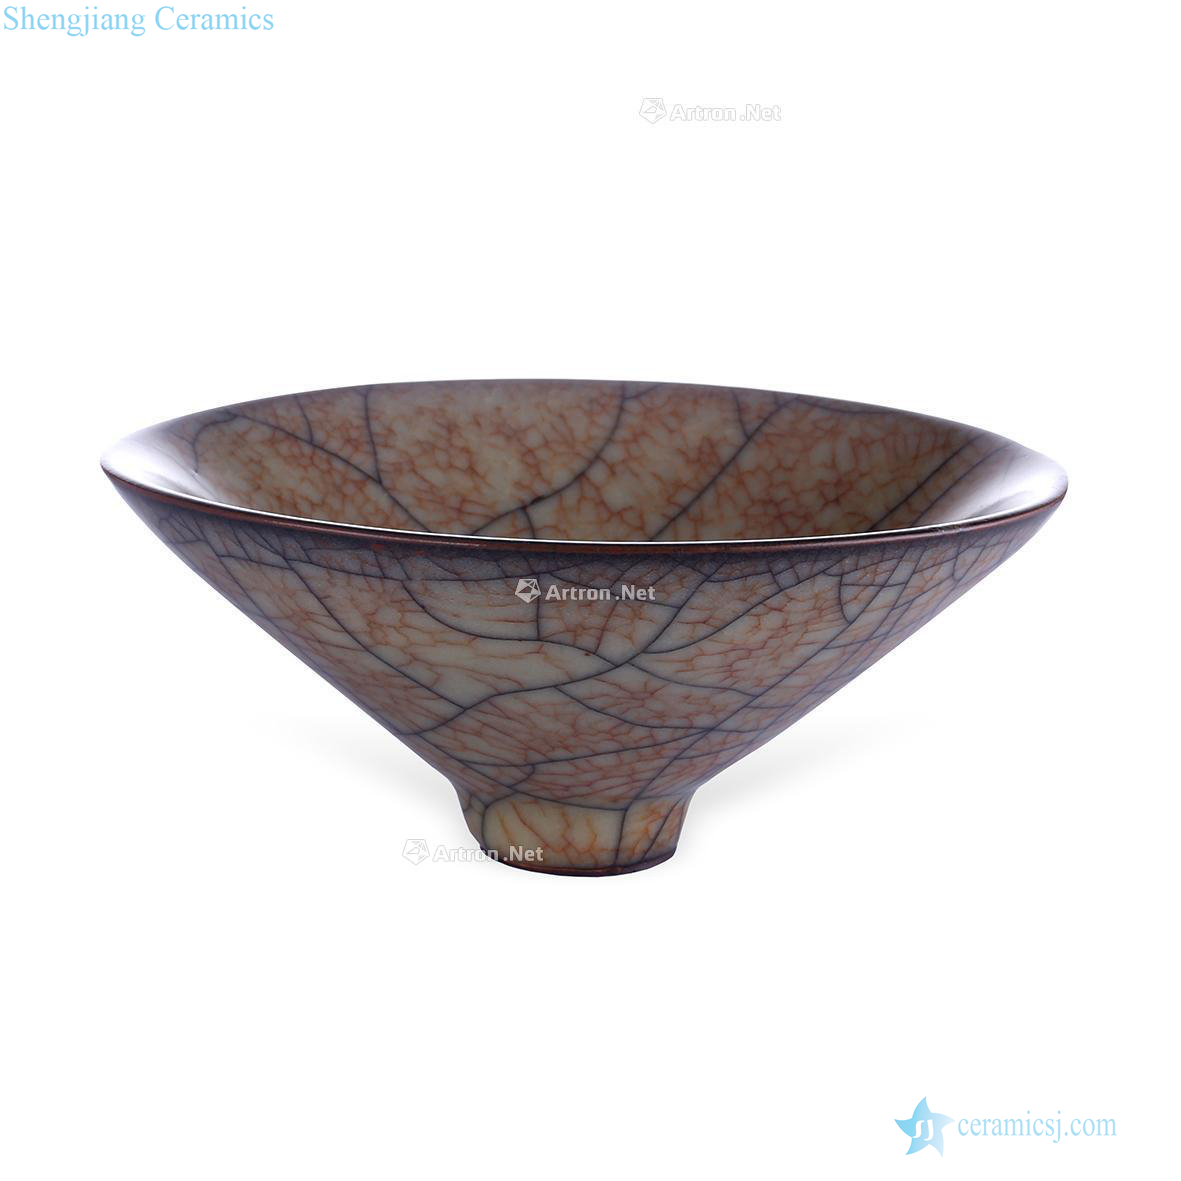 The song dynasty kiln hat to bowl